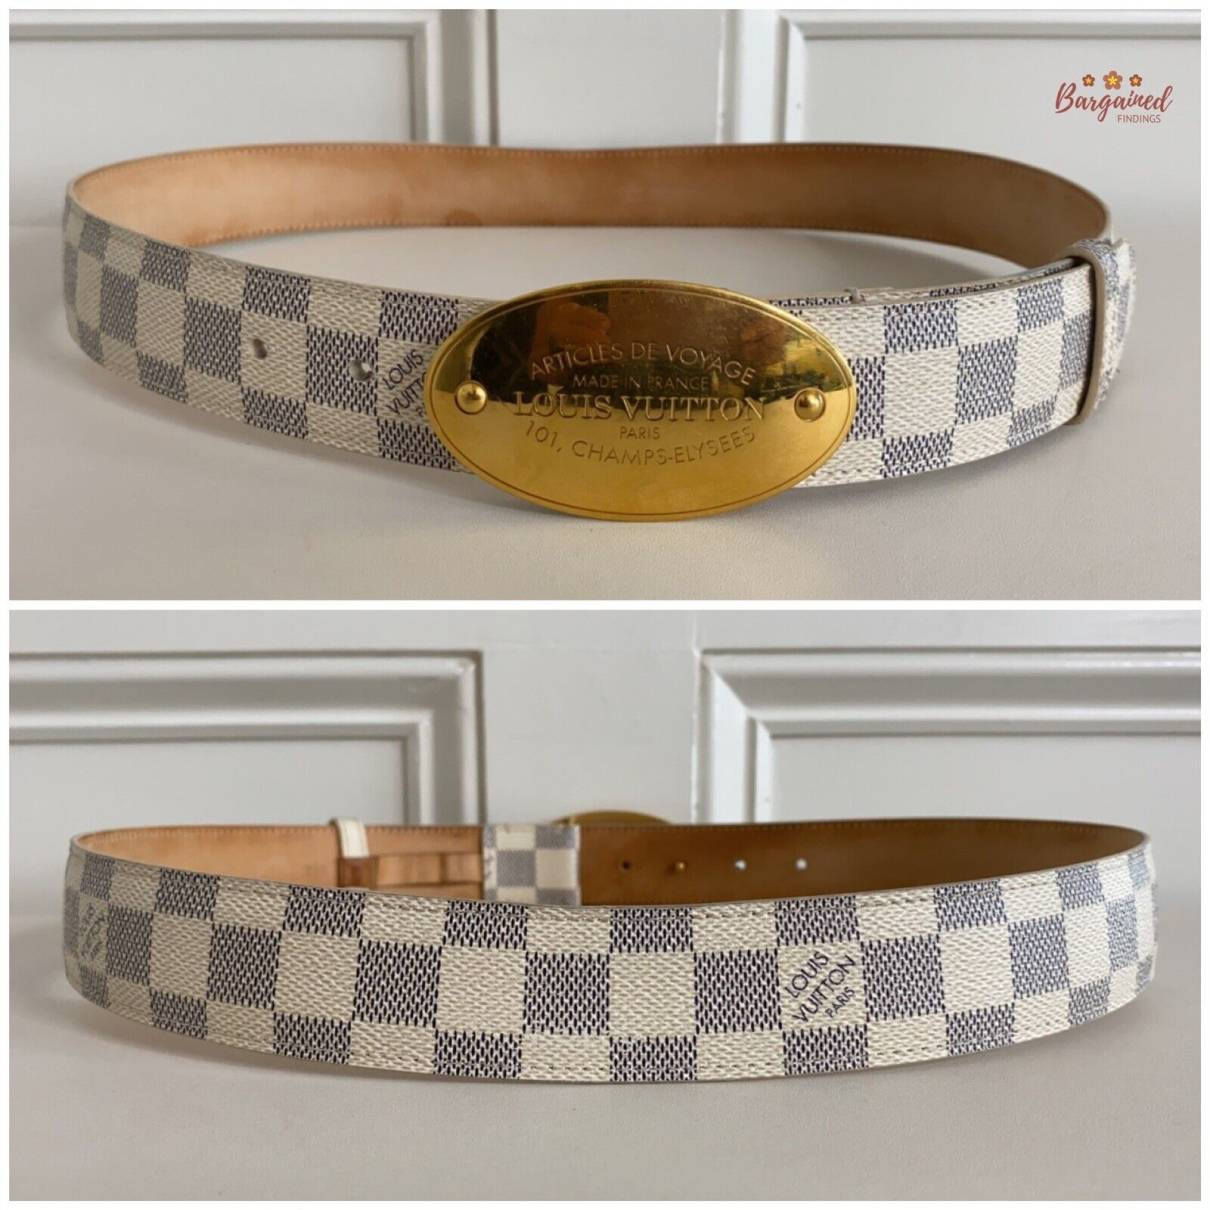 Louis Vuitton - Authenticated Belt - Leather White for Men, Very Good Condition